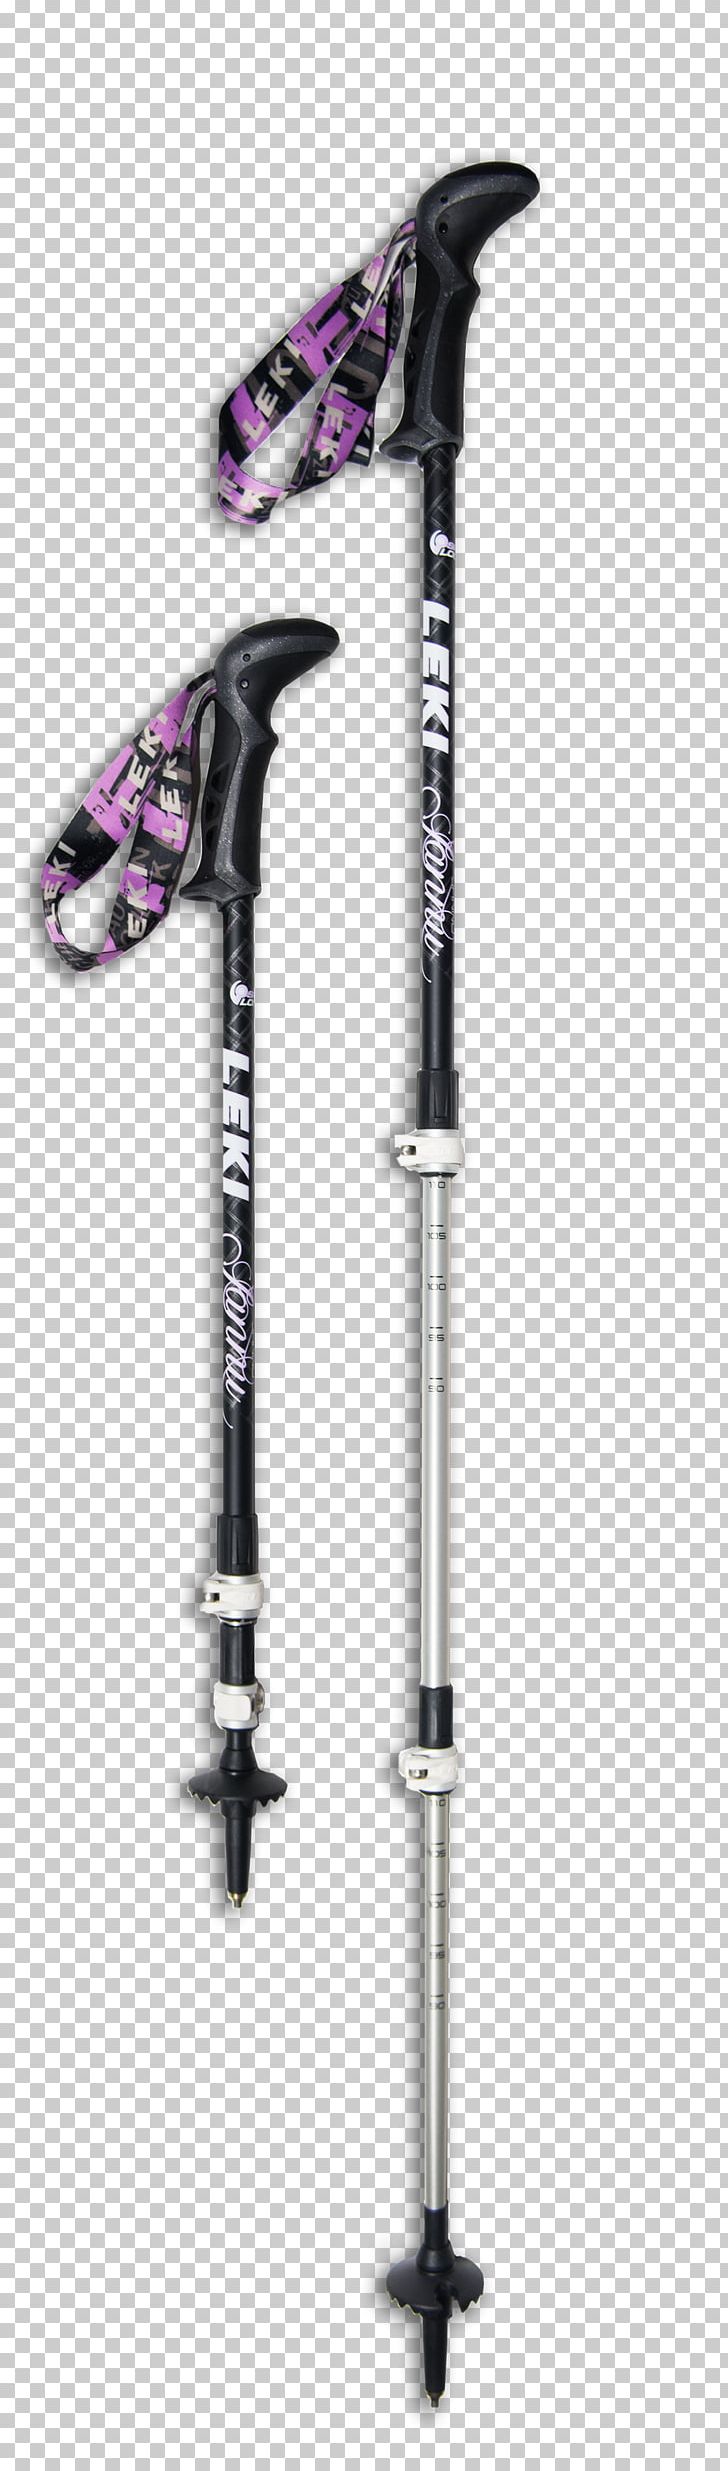 Hiking Poles Backpacking LEKI Lenhart GmbH Outdoor Recreation PNG, Clipart, Alps Mountaineering, Bicycle Frame, Camping, Hiking Equipment, Hiking Poles Free PNG Download